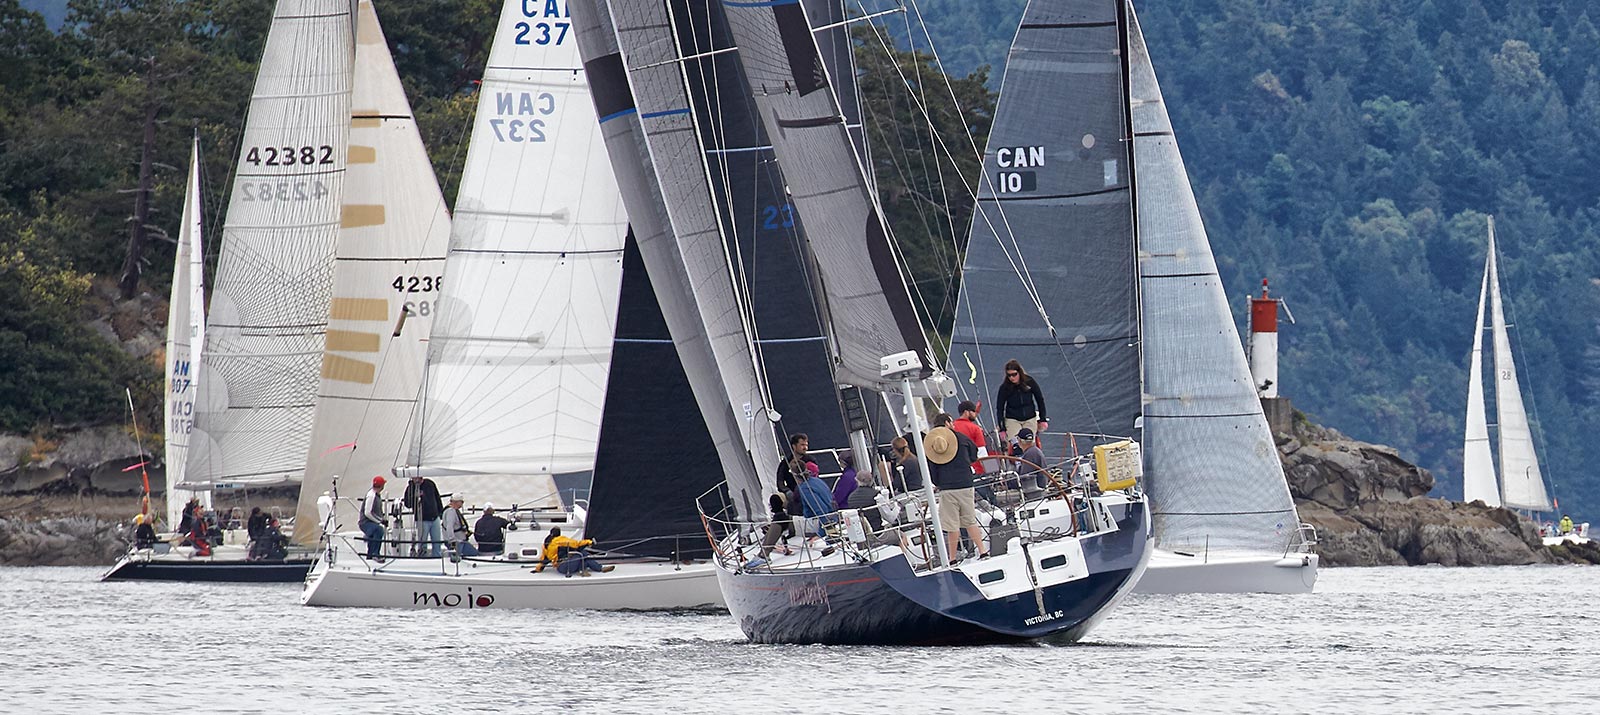 A few of the 100 Round Saltspring Island Race boats leave Ganges Harbour